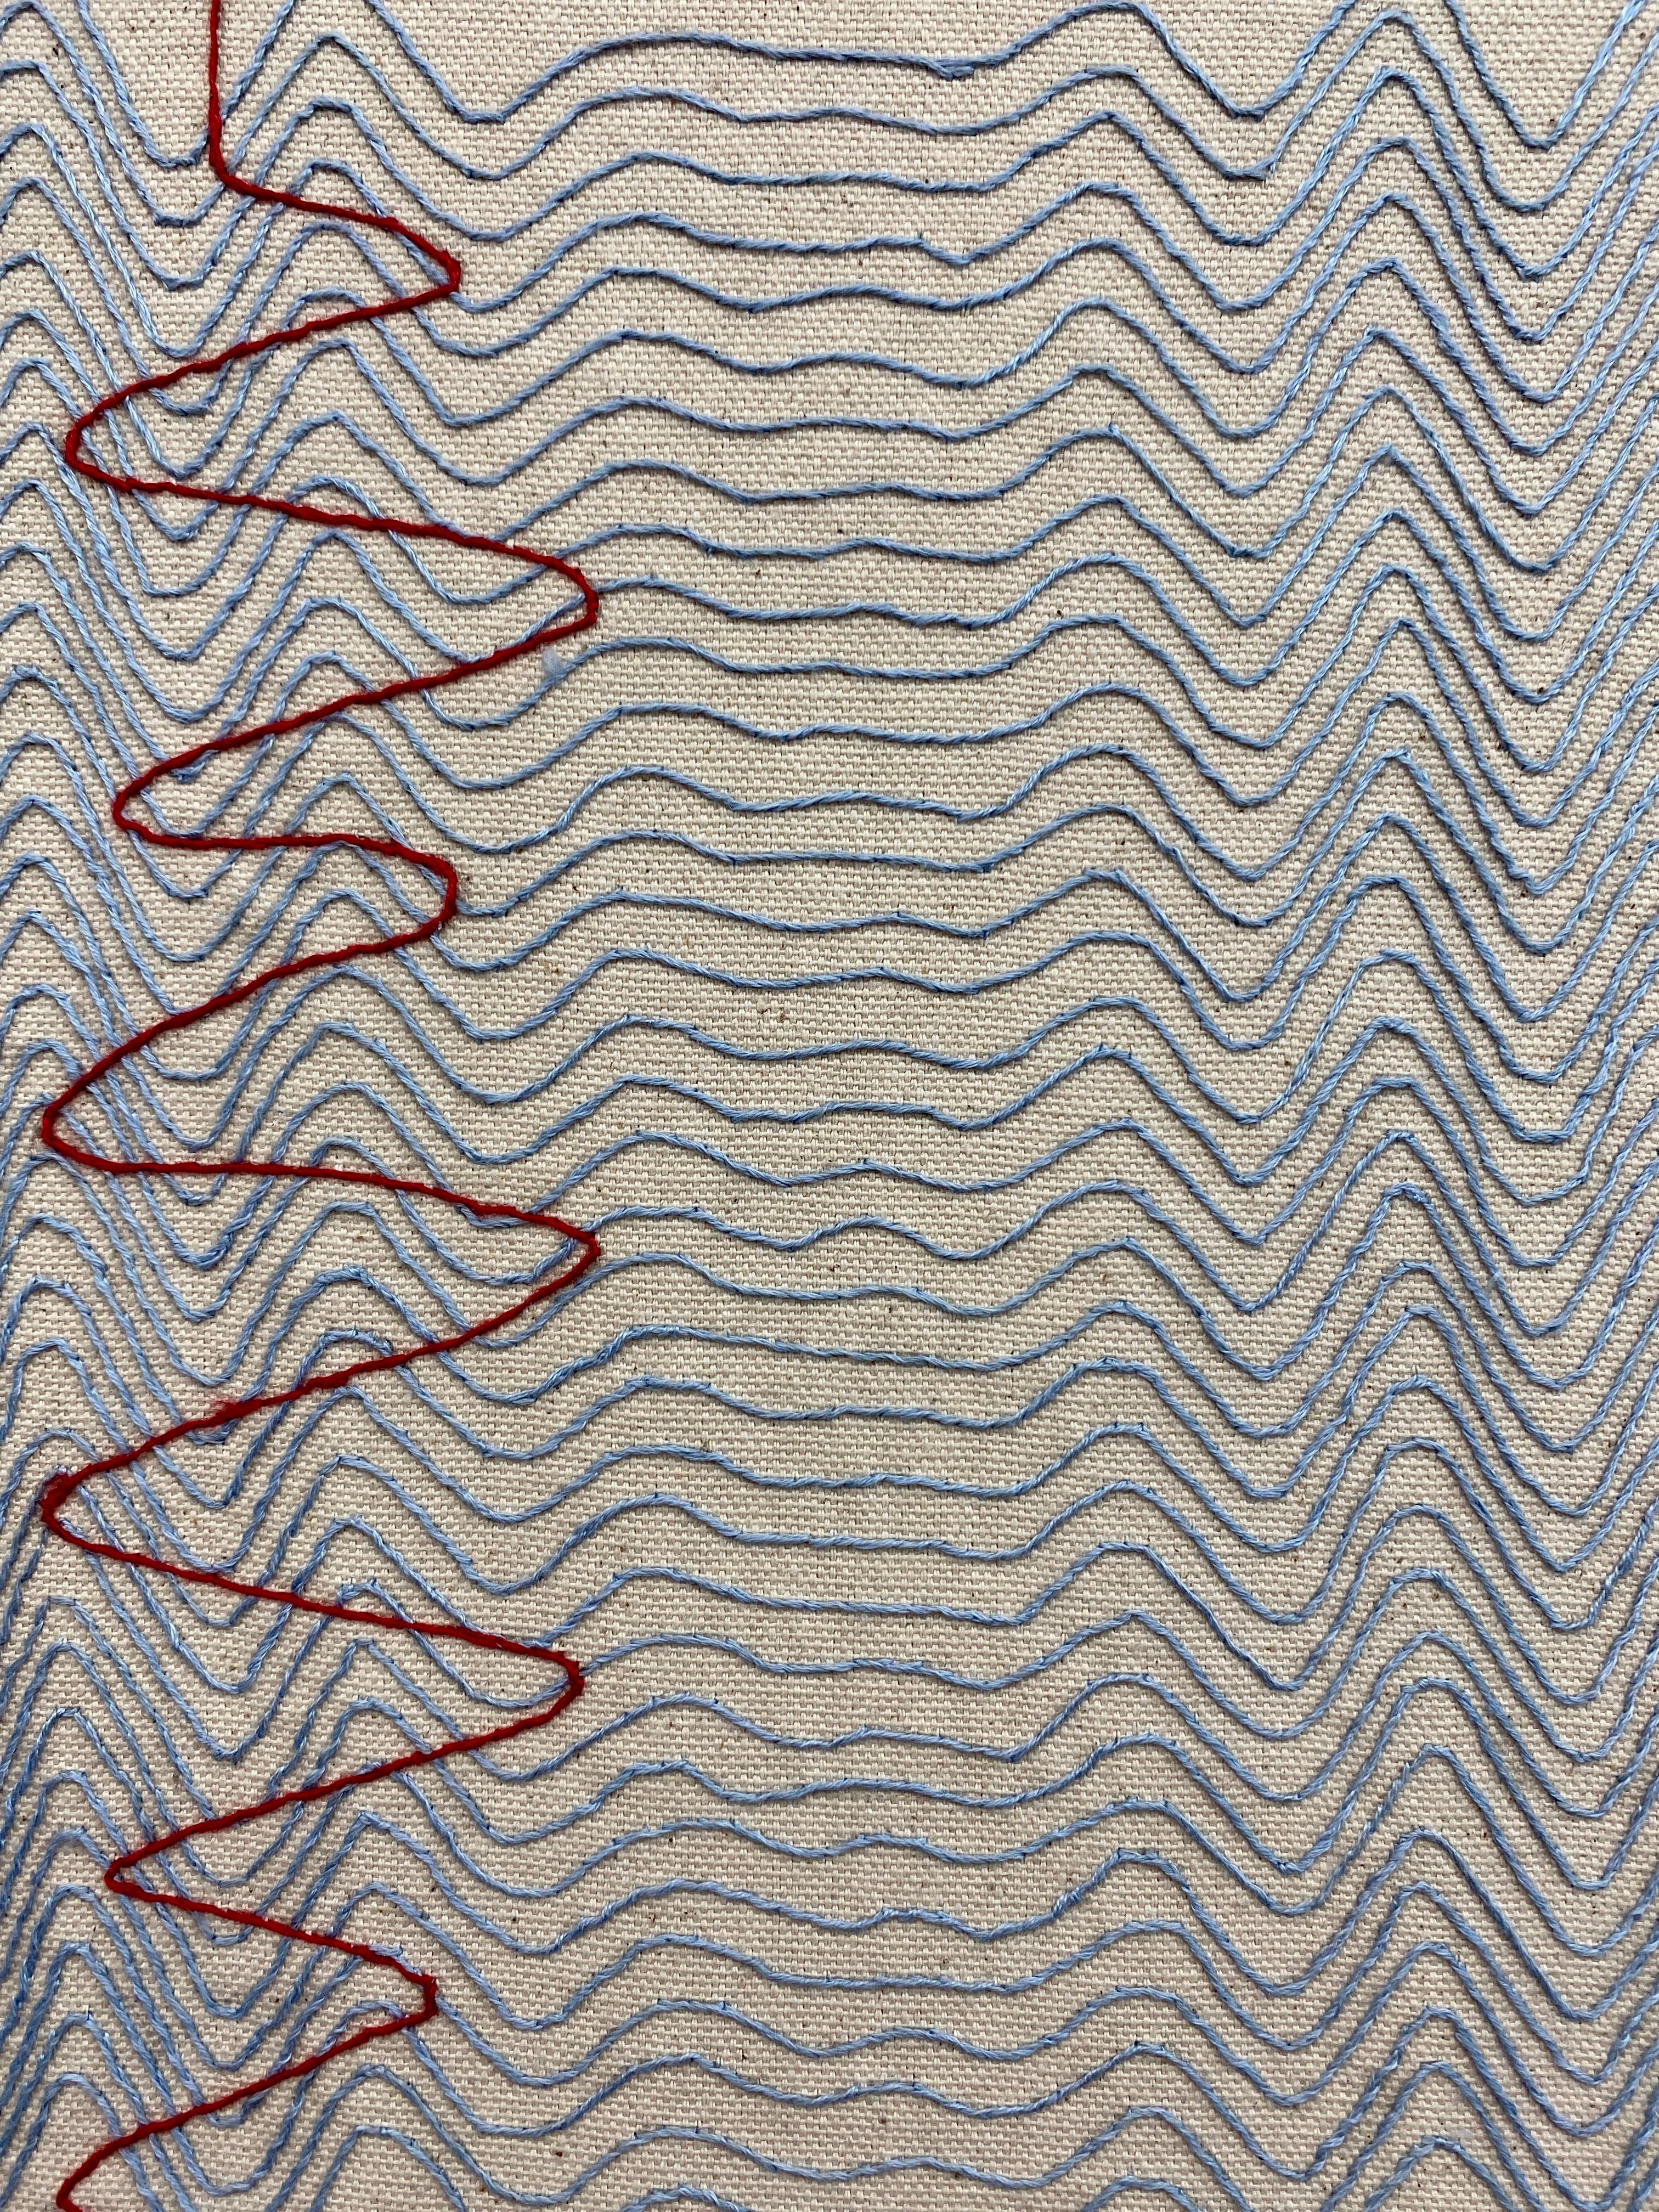 string theory embroidery